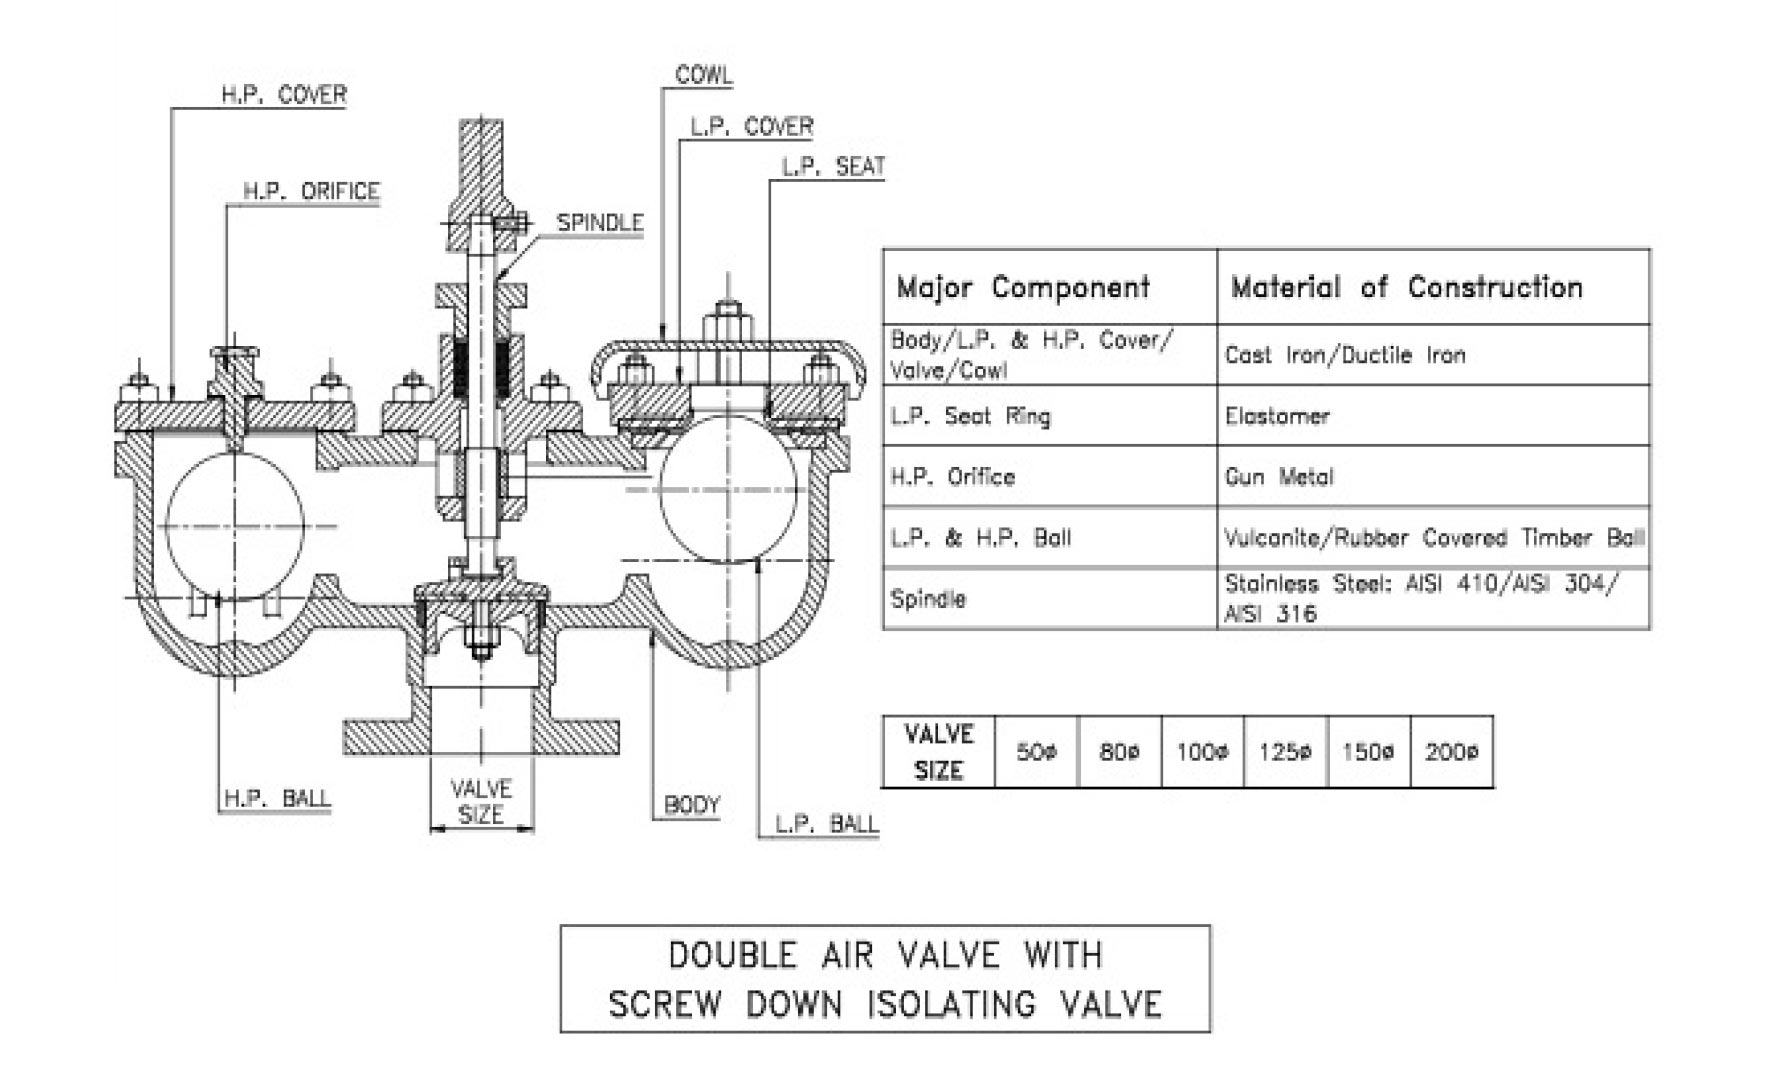 DOUBLE AIR VALVE WITH SCREW DOWN ISOLATING VALVE